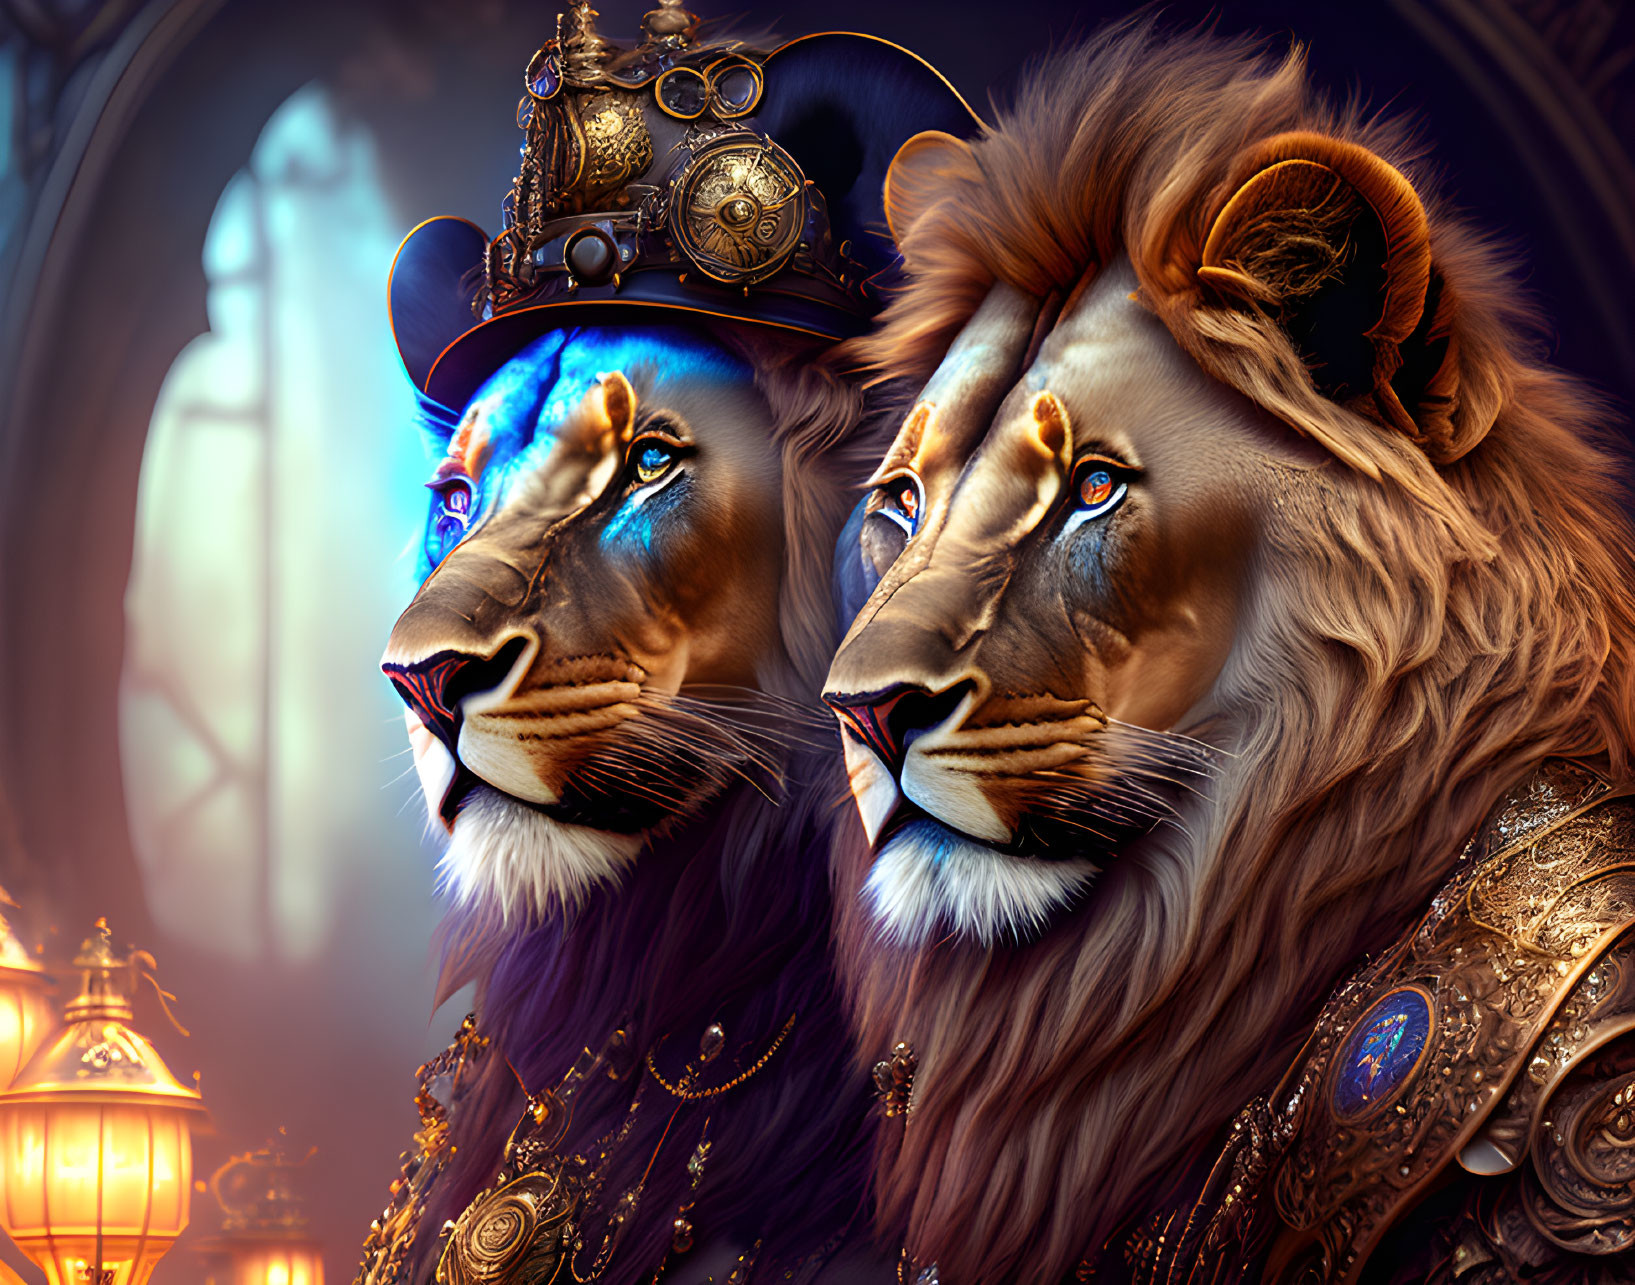 Majestic lions in regal attire with steampunk style, against mystical backdrop